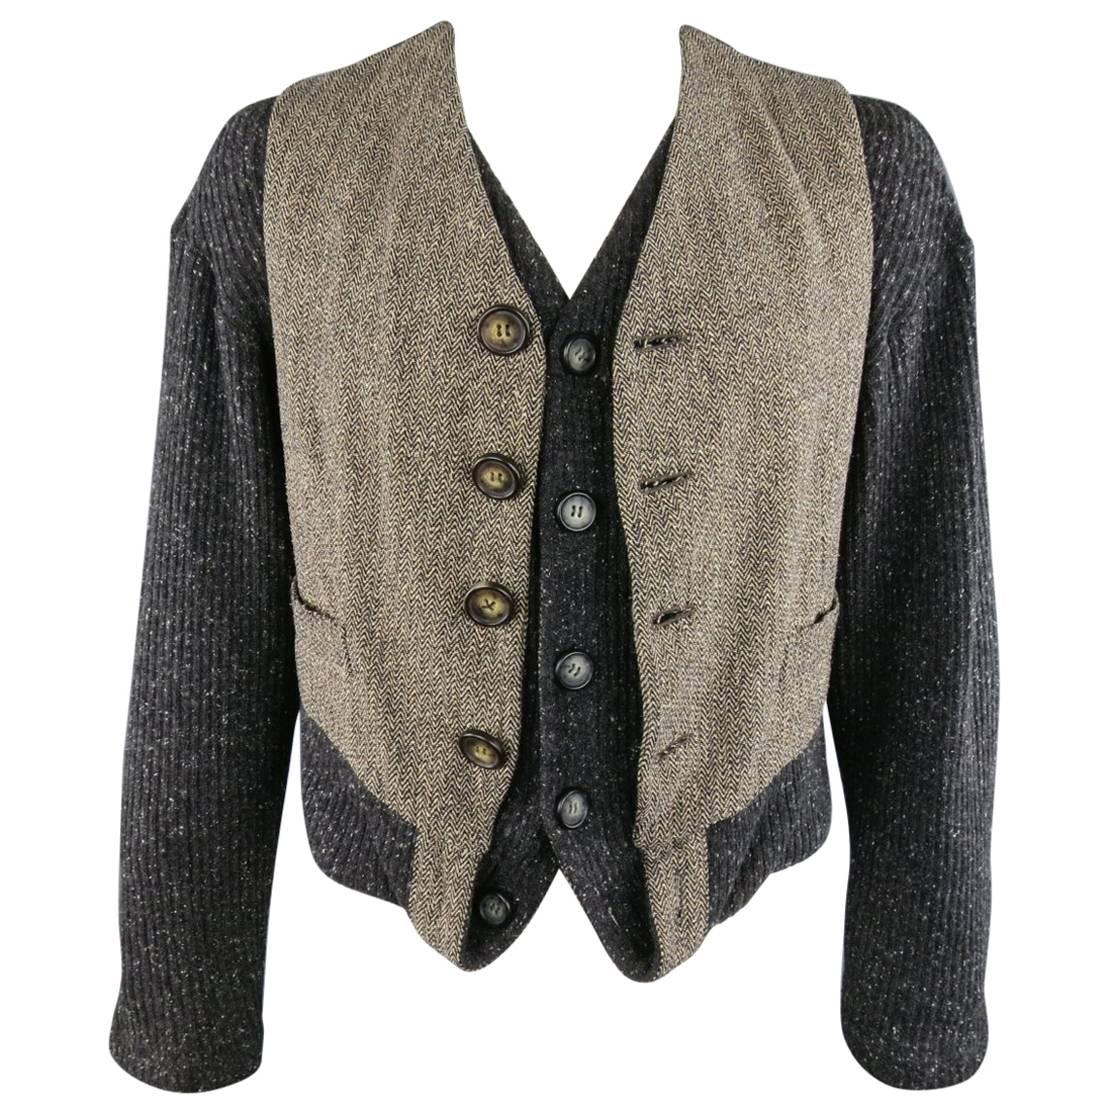 Men's DOLCE & GABBANA Size L Charcoal & Taupe Vest Layered Cardigan